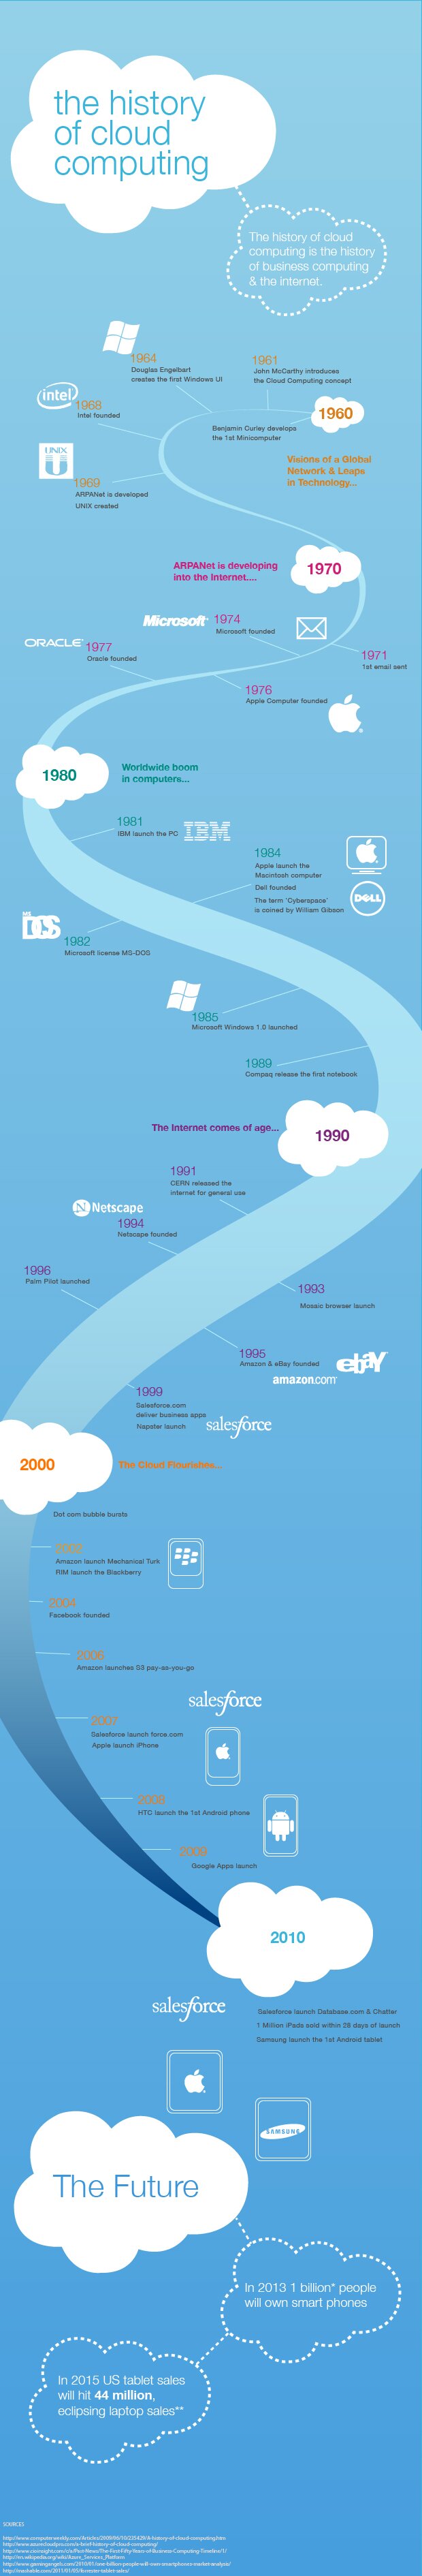 A Complete History of Cloud Computing